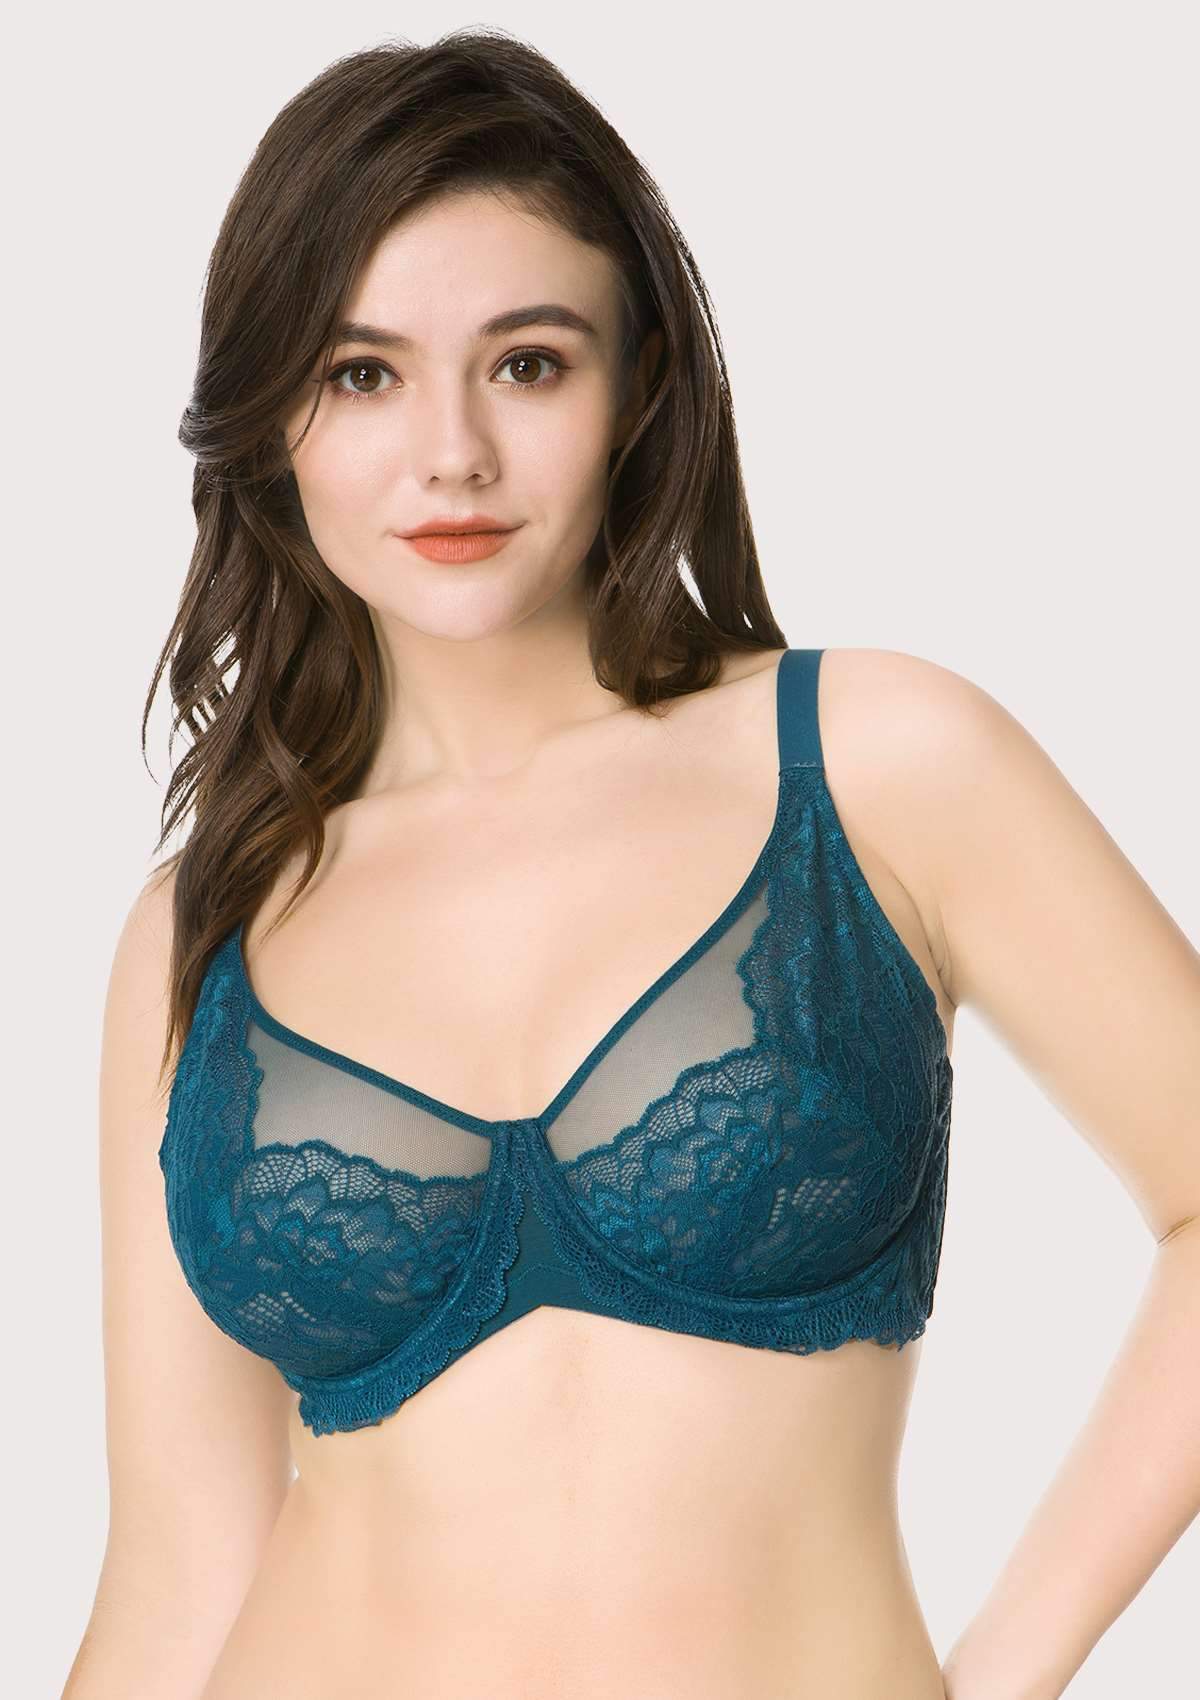 HSIA Peony Lace Unlined Supportive Underwire Bra - Dark Blue / 40 / C